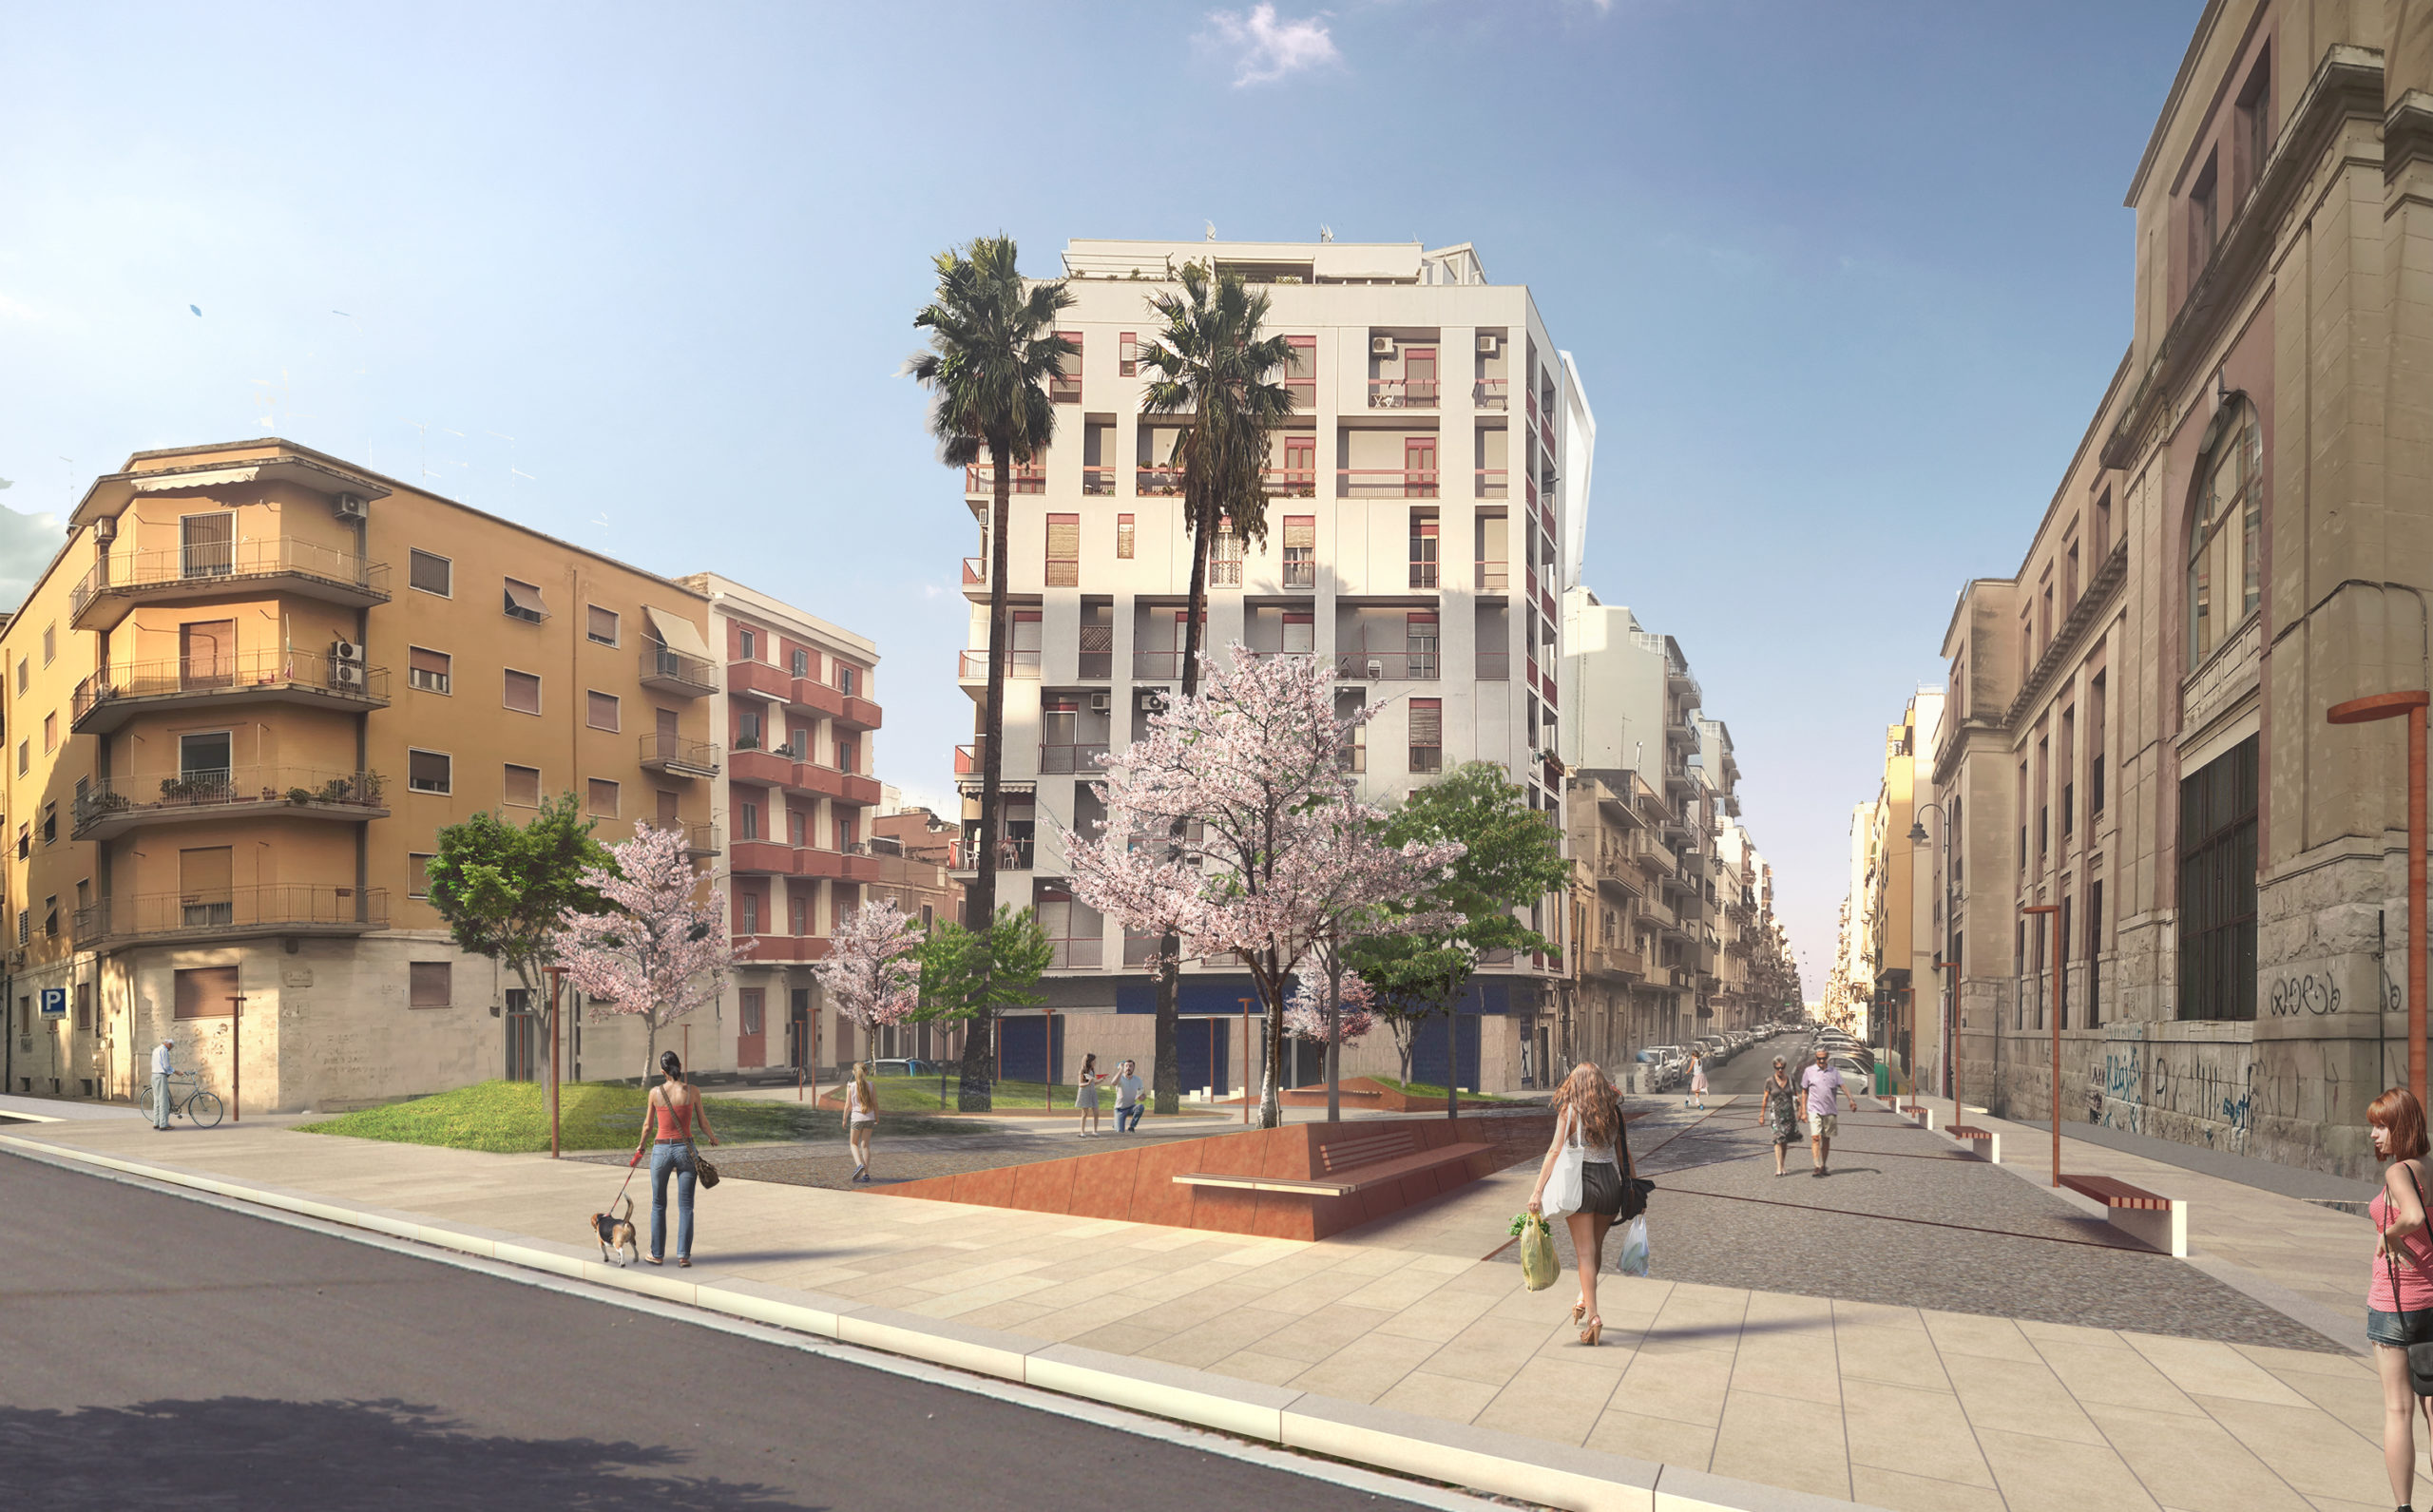 Redevelopment of public space at Piazza Enrico De Nicola in Bari – Ongoing